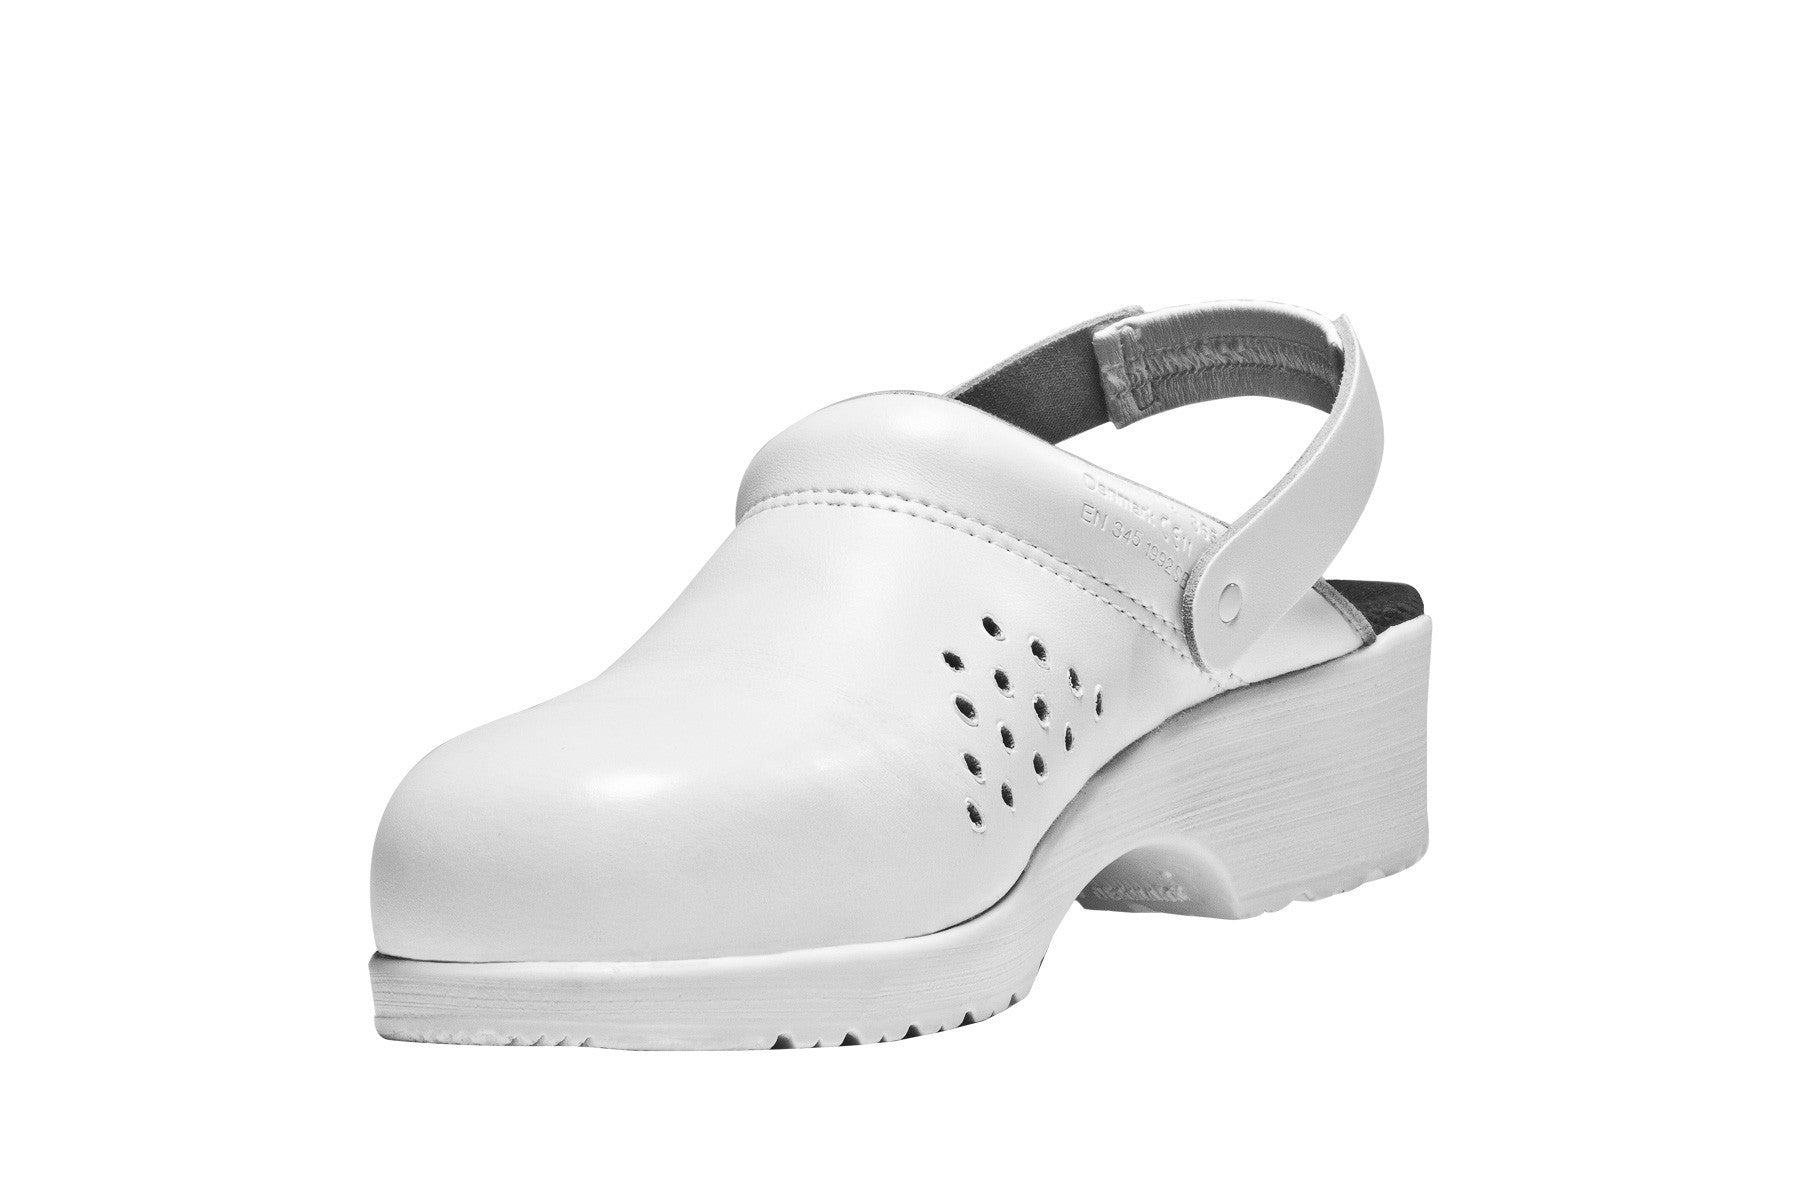 Furiano * Blanc T35  - Clement Design - Chaussures cuisine - FURIANO BLANC T35